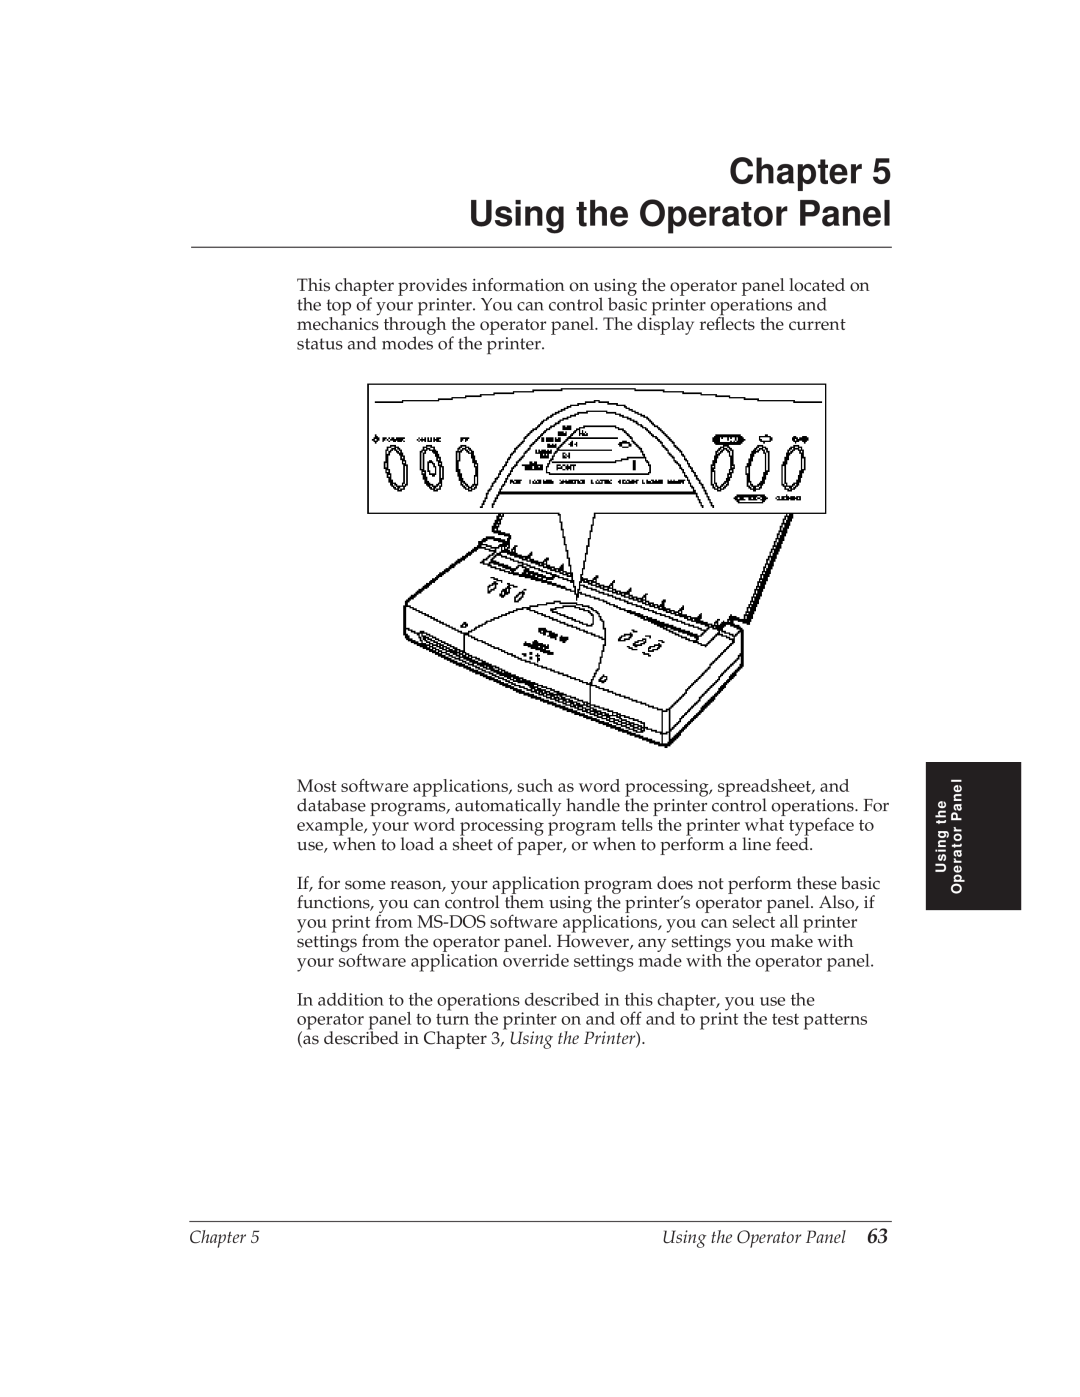 Canon BJ-30 manual Chapter Using the Operator Panel 